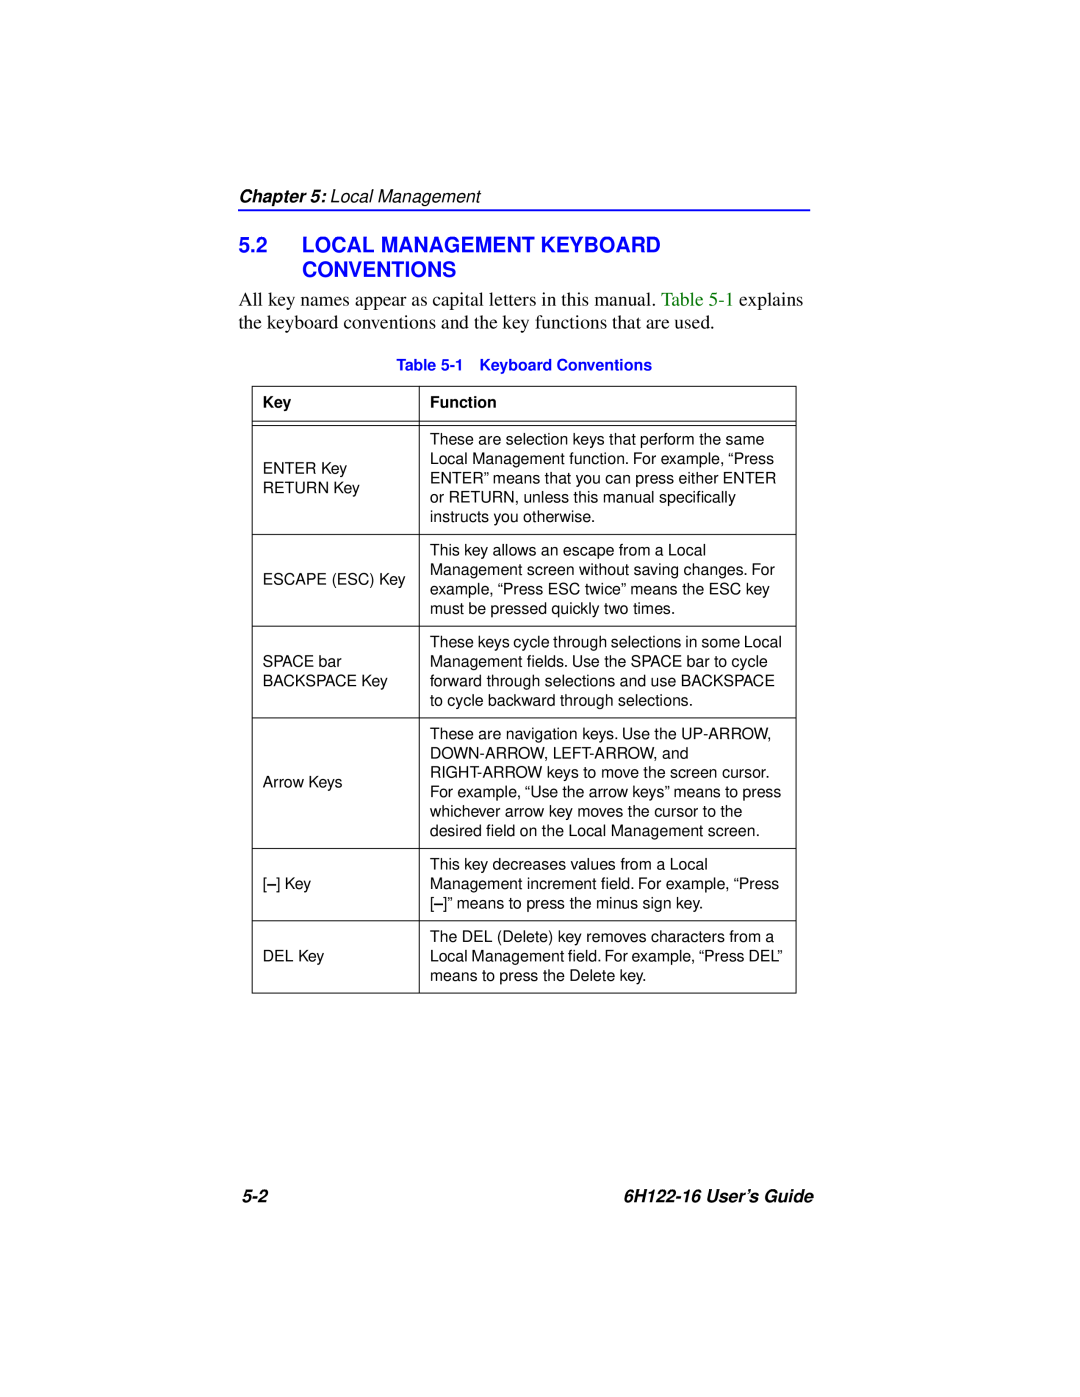 Cabletron Systems manual Local Management Keyboard Conventions, 6H122-16 User’s Guide, 1 Keyboard Conventions, Function 